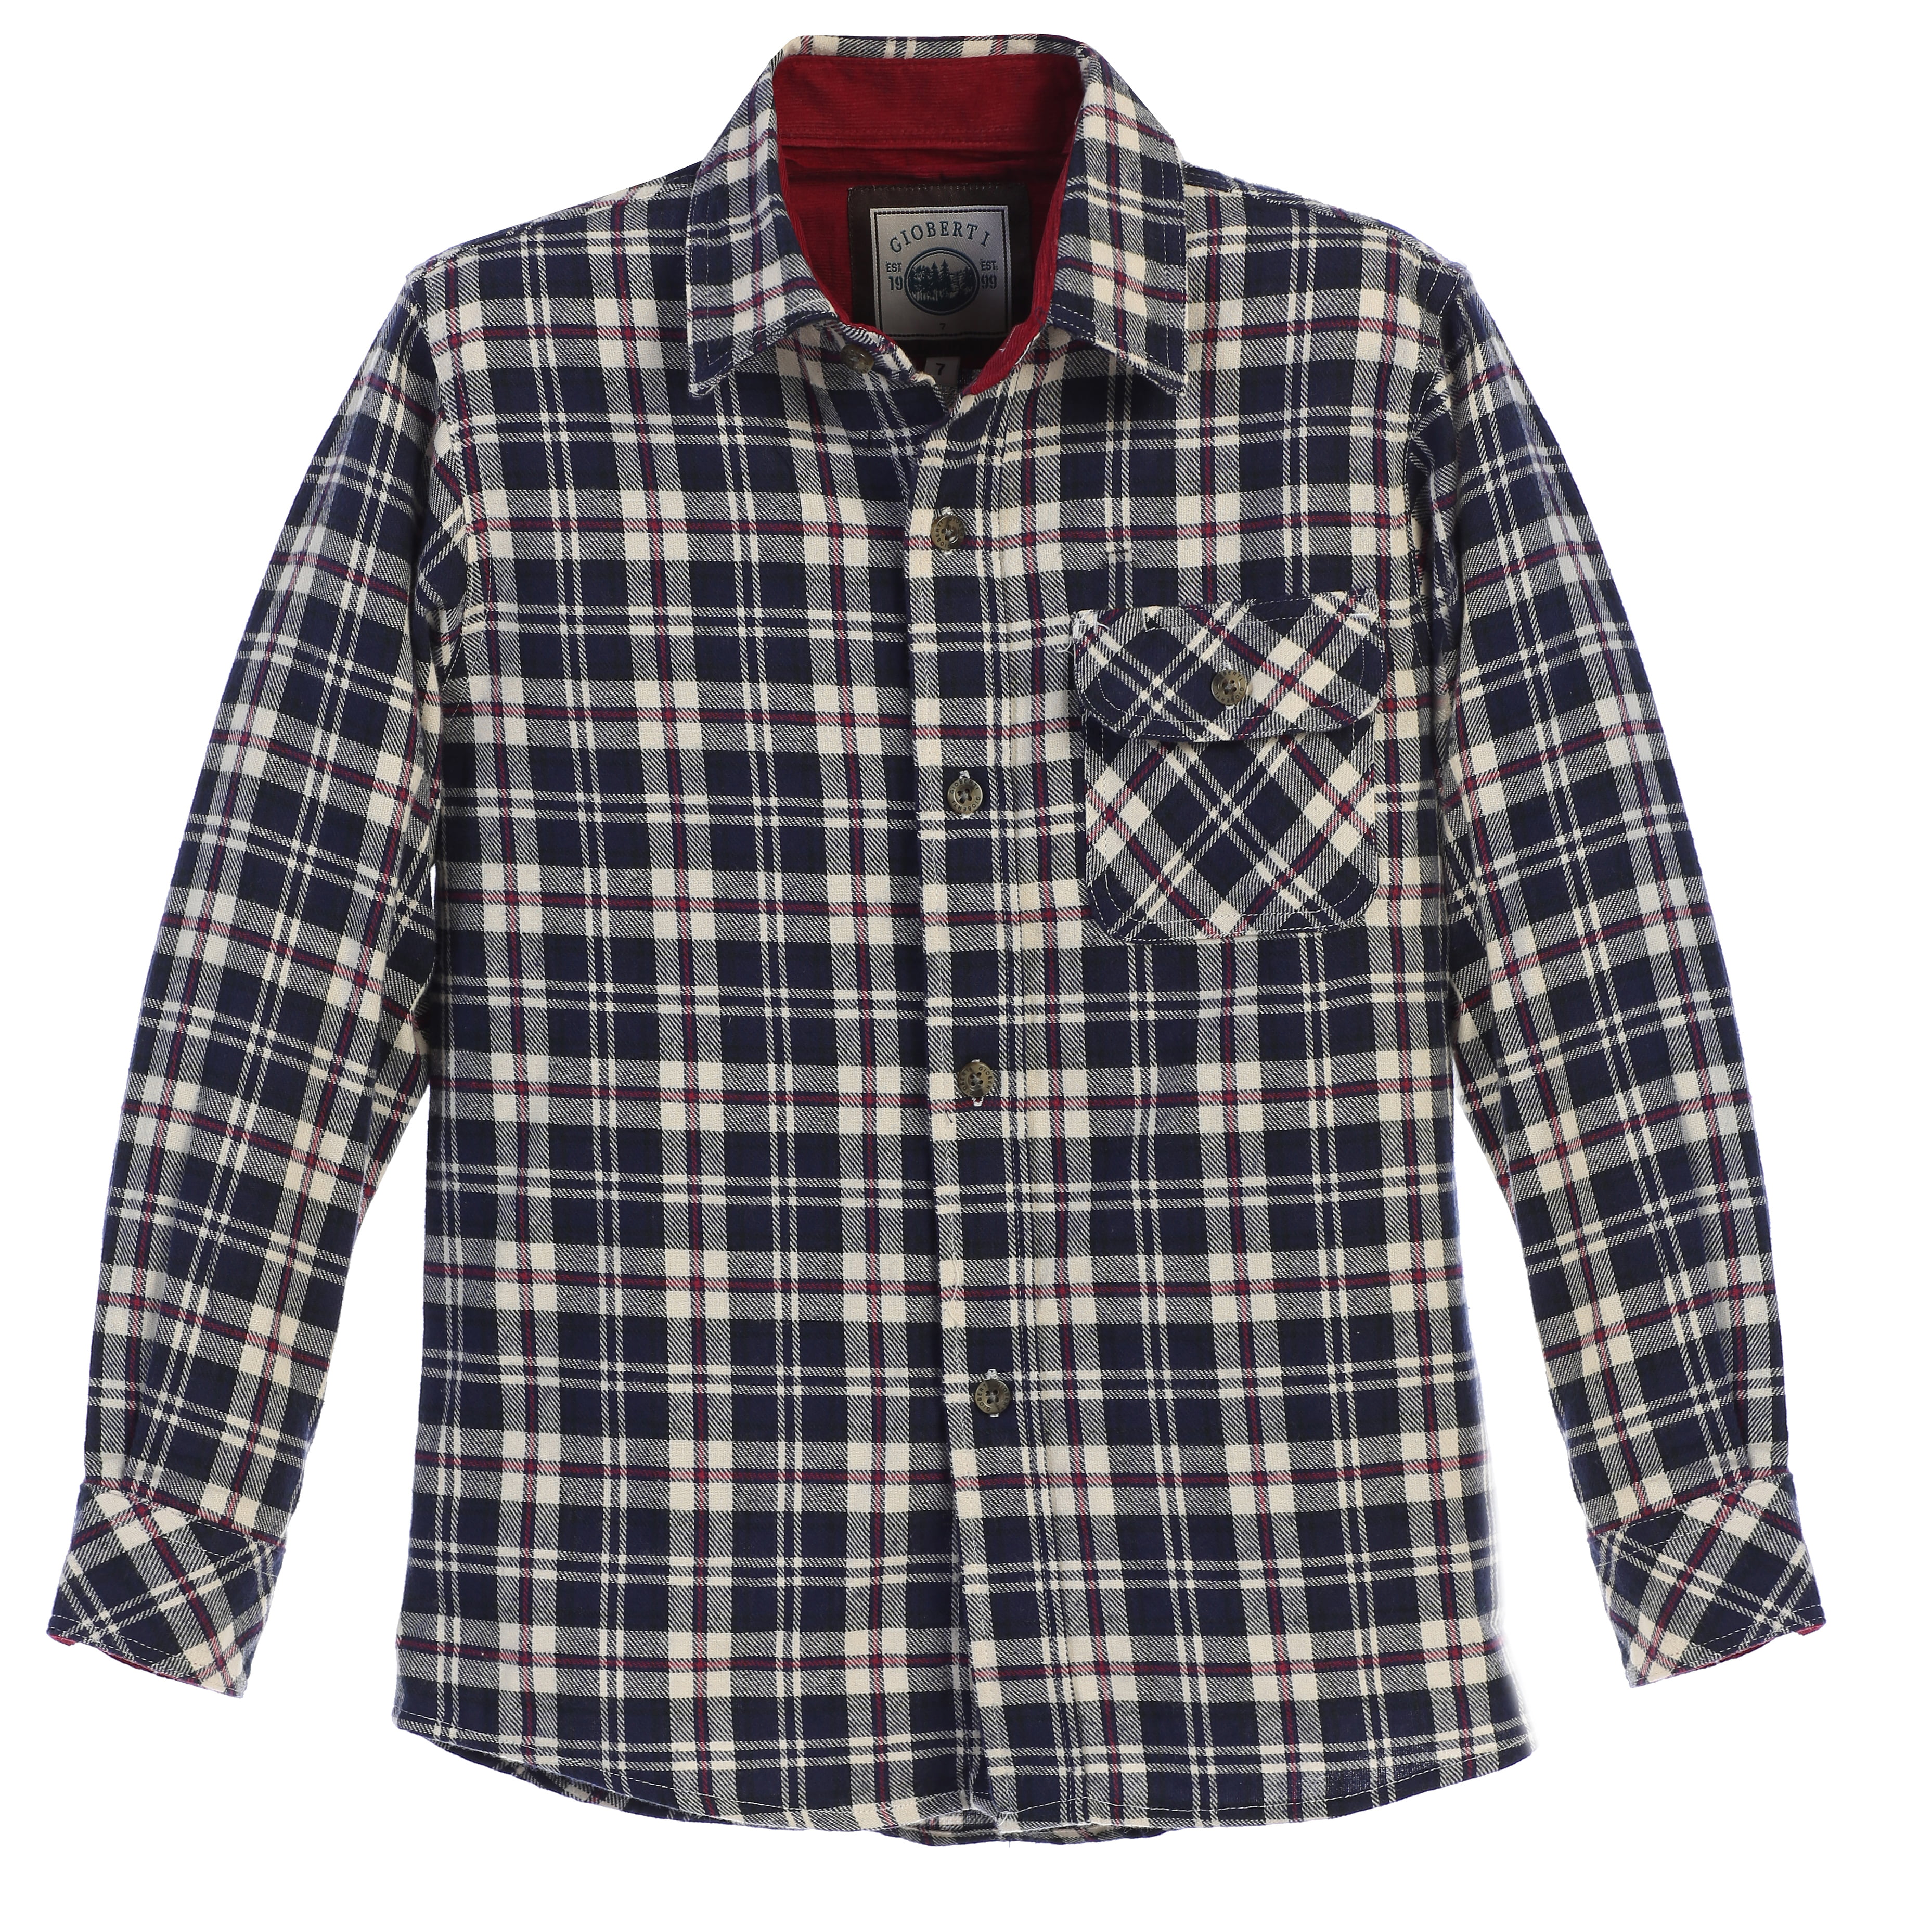 Blue & White Checker Shirt with Red contrast